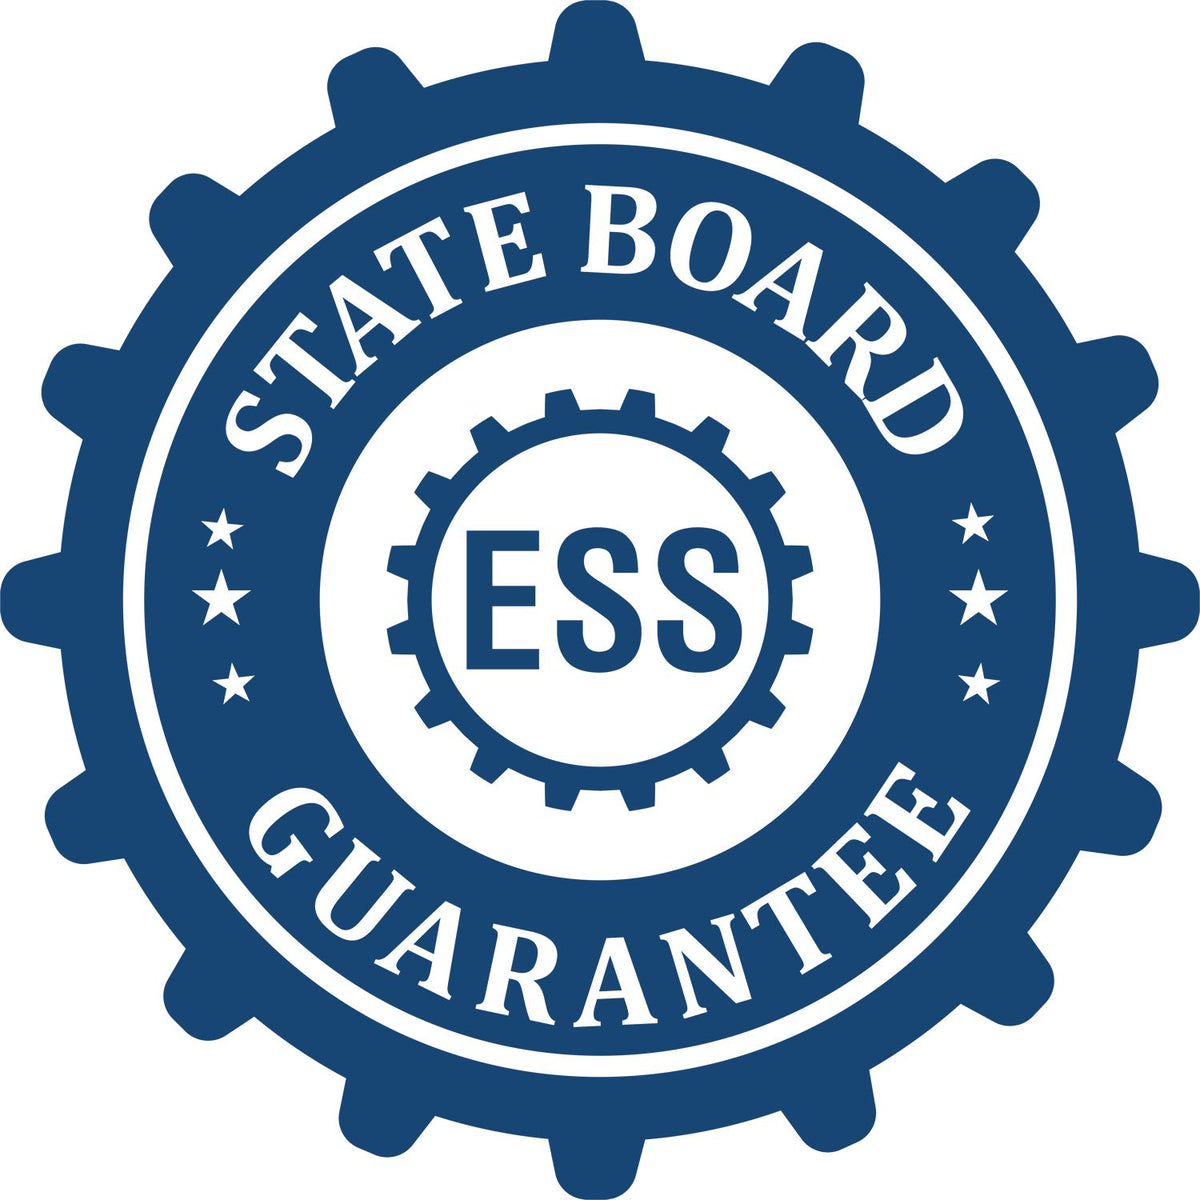 An emblem in a gear shape illustrating a state board guarantee for the Pennsylvania Engineer Desk Seal product.